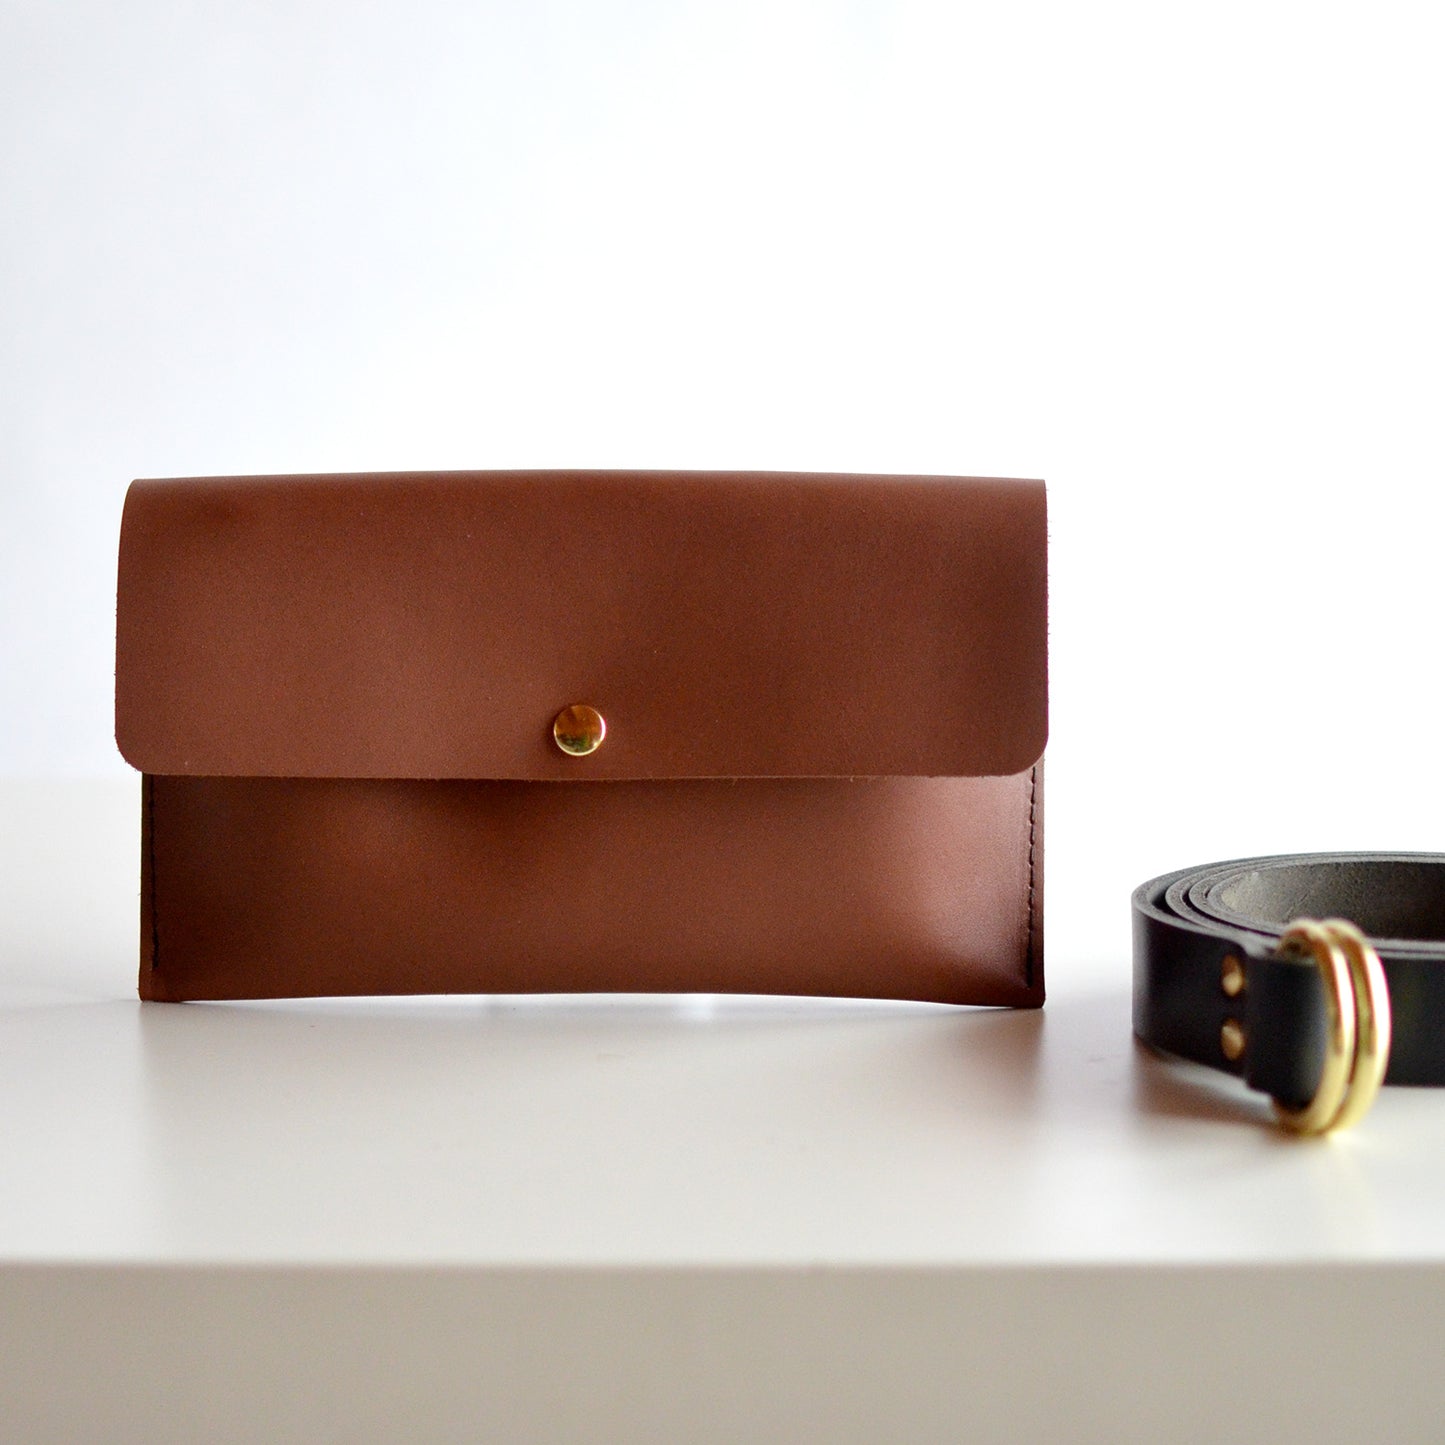 PERFECTLY IMPERFECT Hipster Bag (Fanny Pack + Clutch) - Brown Leather